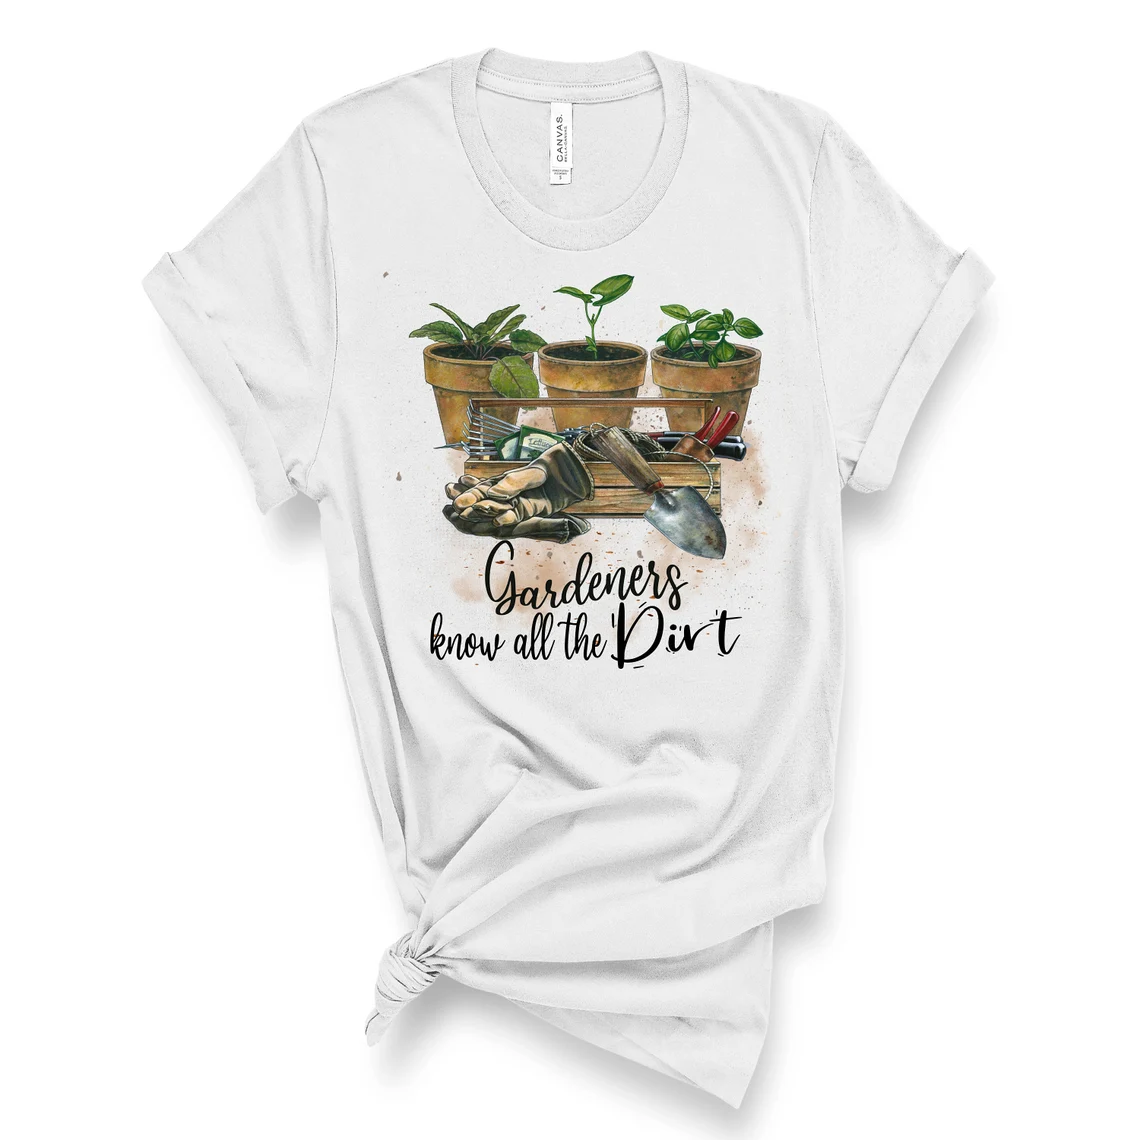 A great print on a white t-shirt in flower pots.